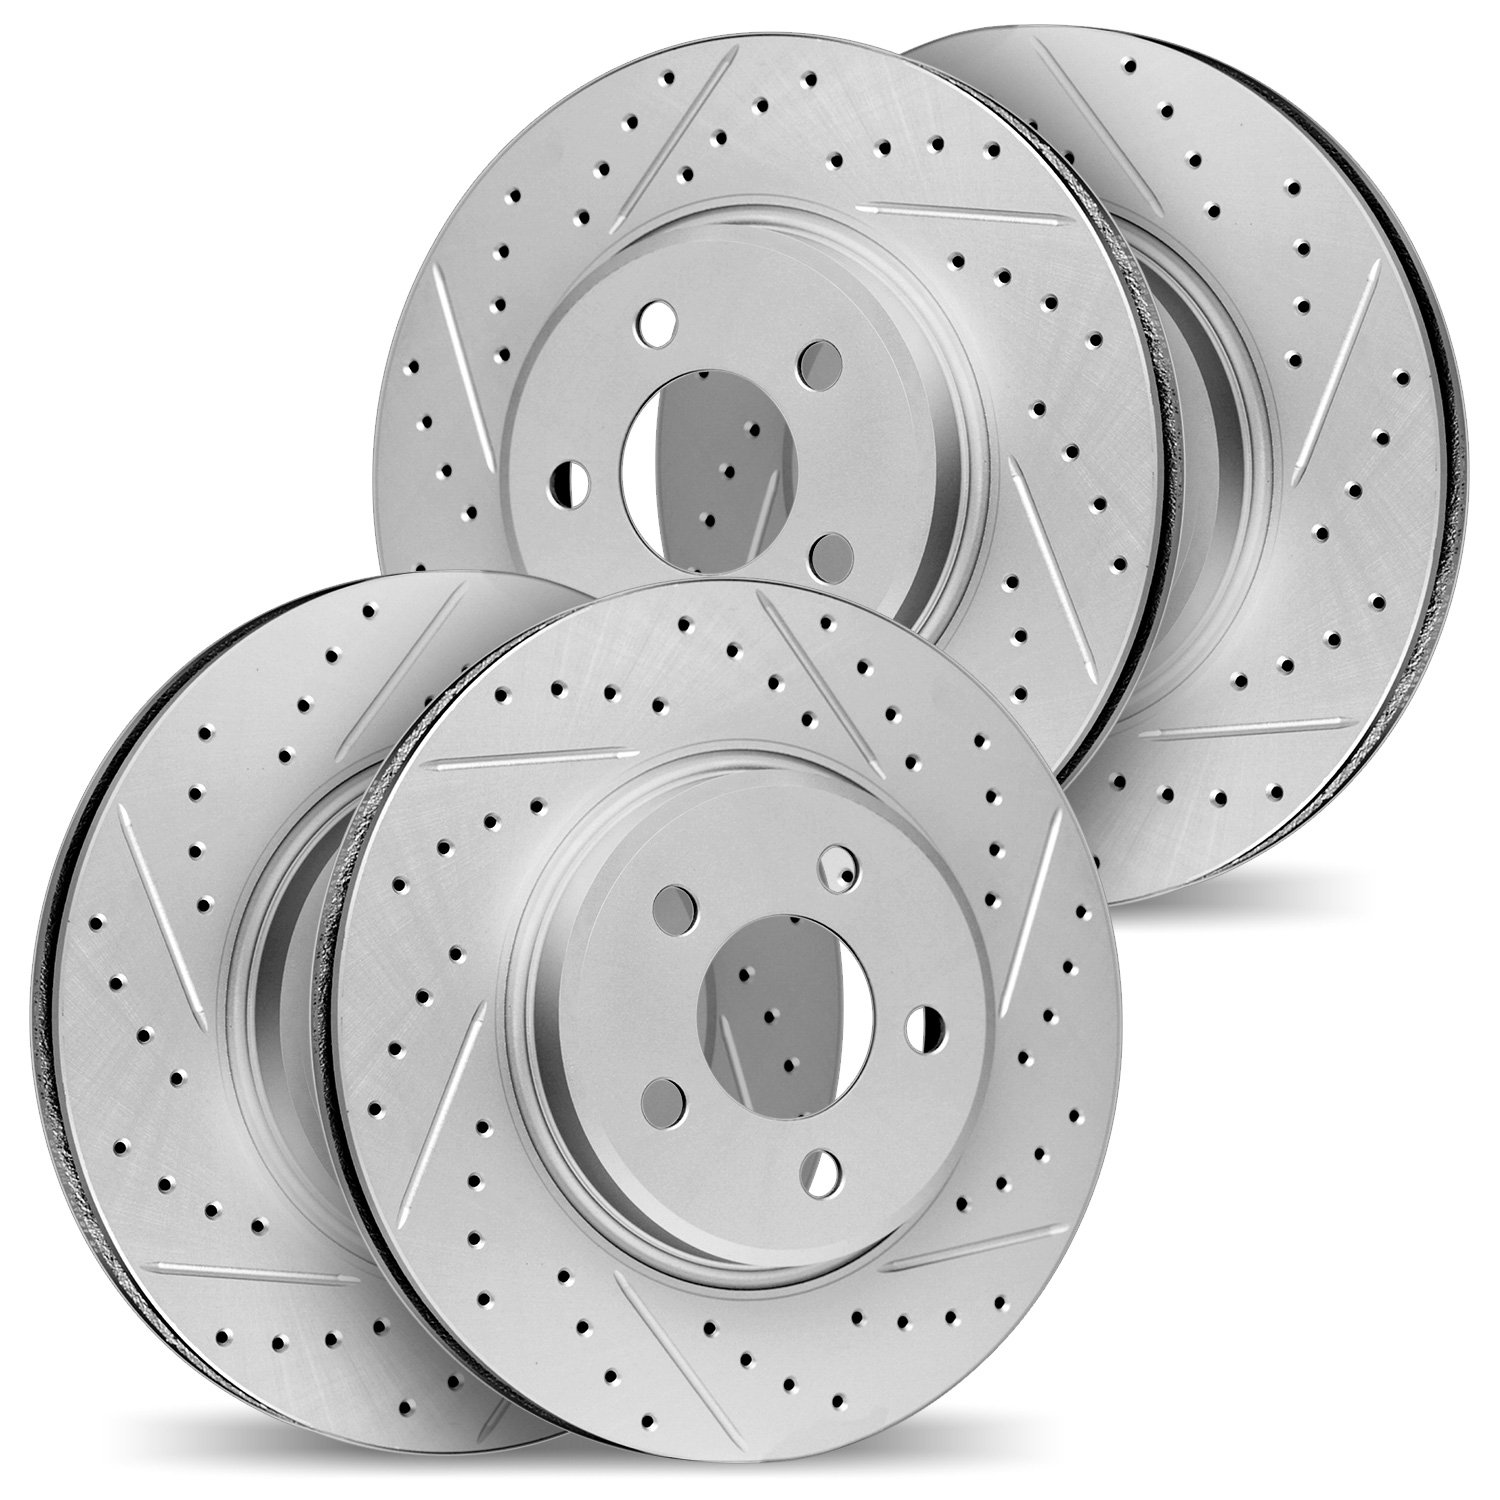 2004-68002 Geoperformance Drilled/Slotted Brake Rotors, 2007-2015 Infiniti/Nissan, Position: Front and Rear